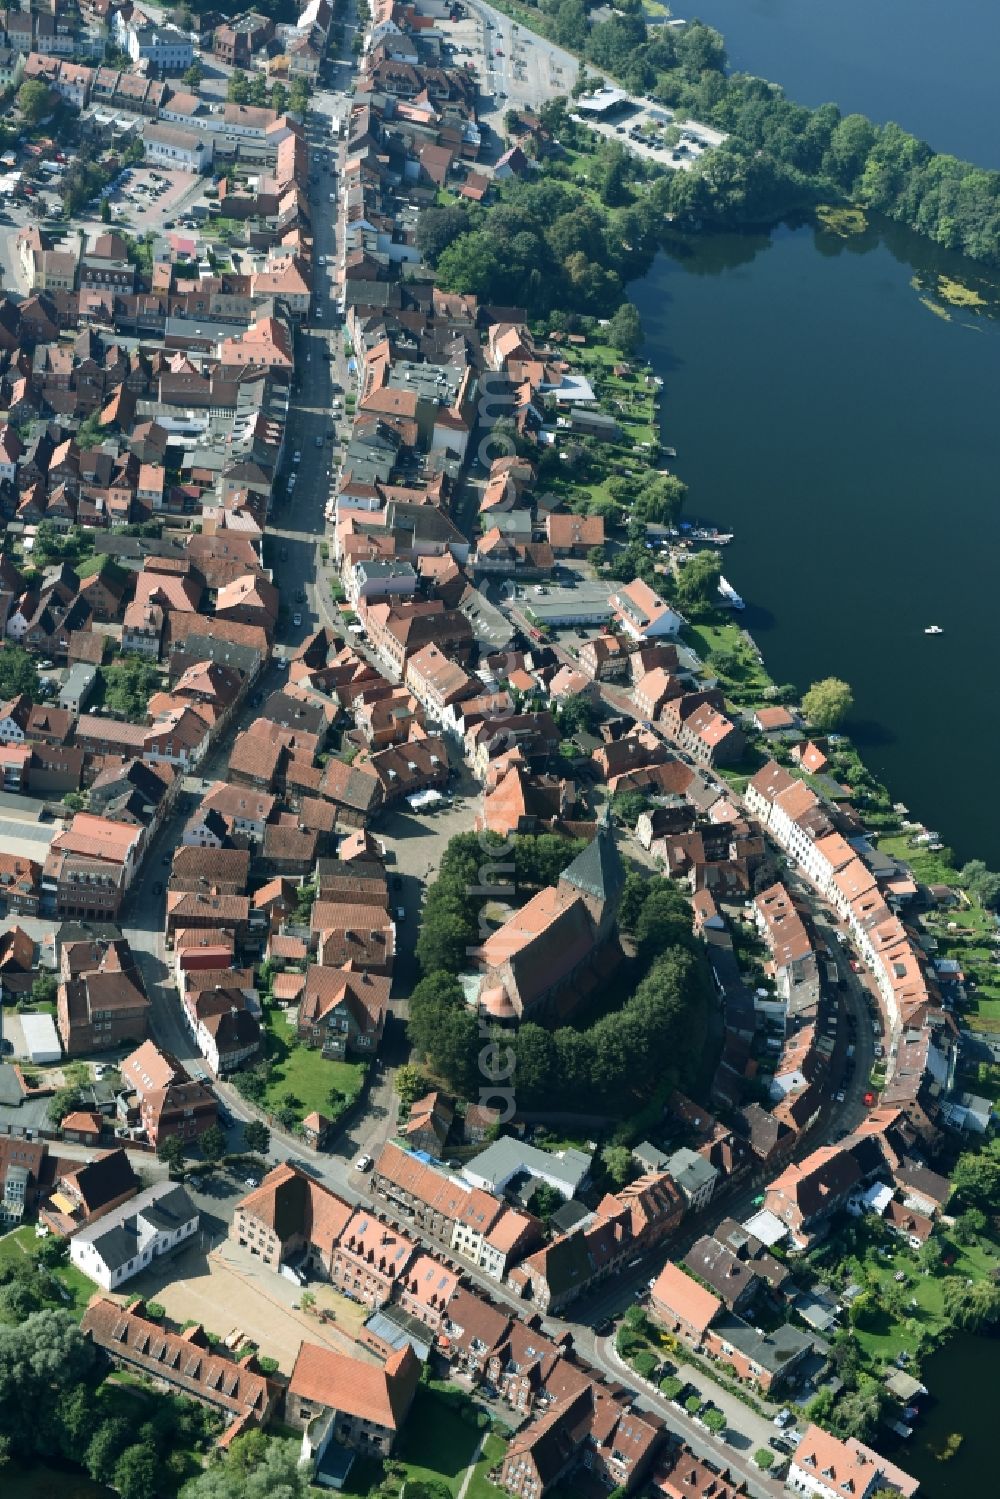 Mölln from the bird's eye view: City view of downtown area in Moelln in the state Schleswig-Holstein